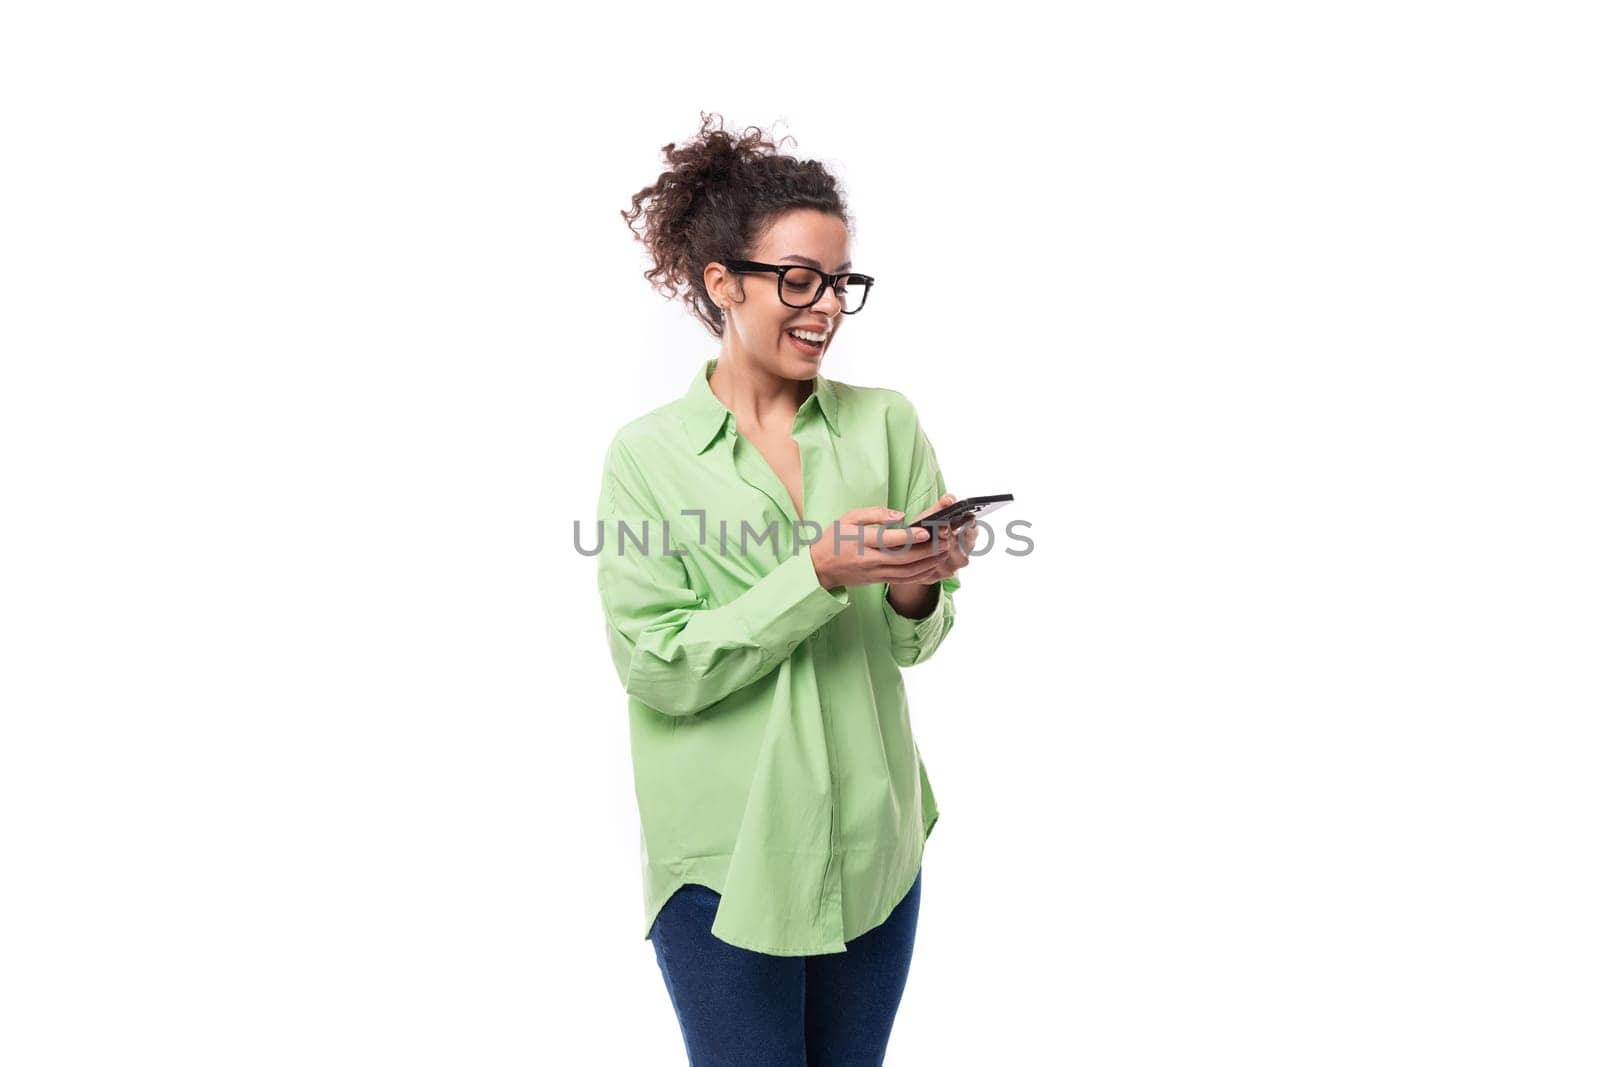 pretty young brunette curly woman in glasses dressed in a green shirt is chatting in a smartphone.